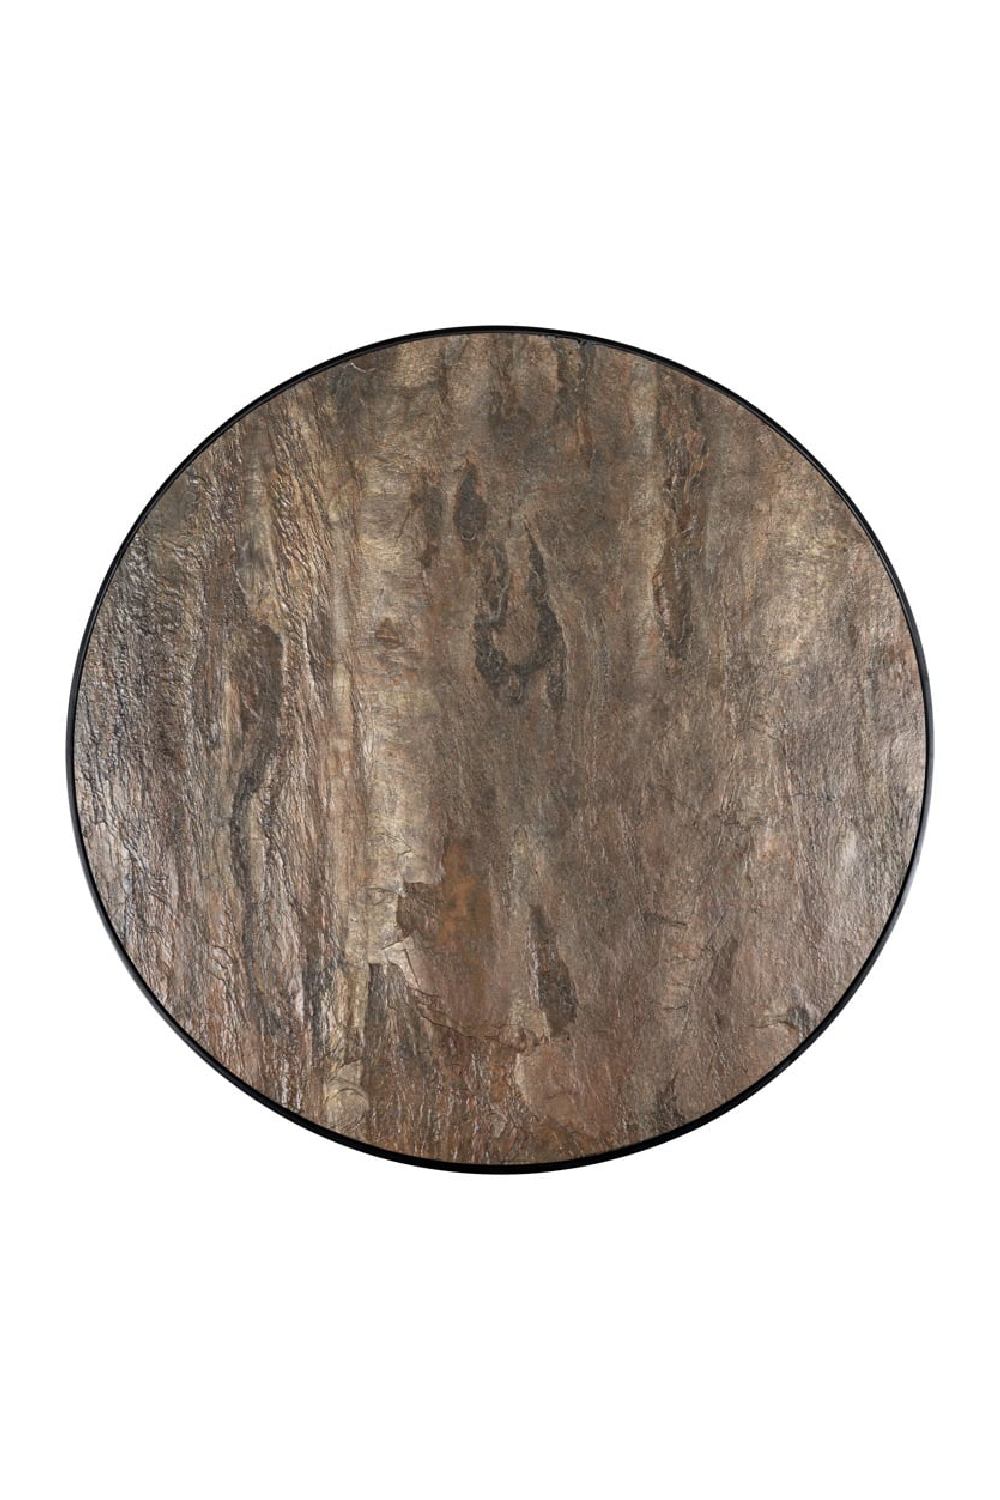 Round Stone Dining Table | OROA Russell | Oroa.com